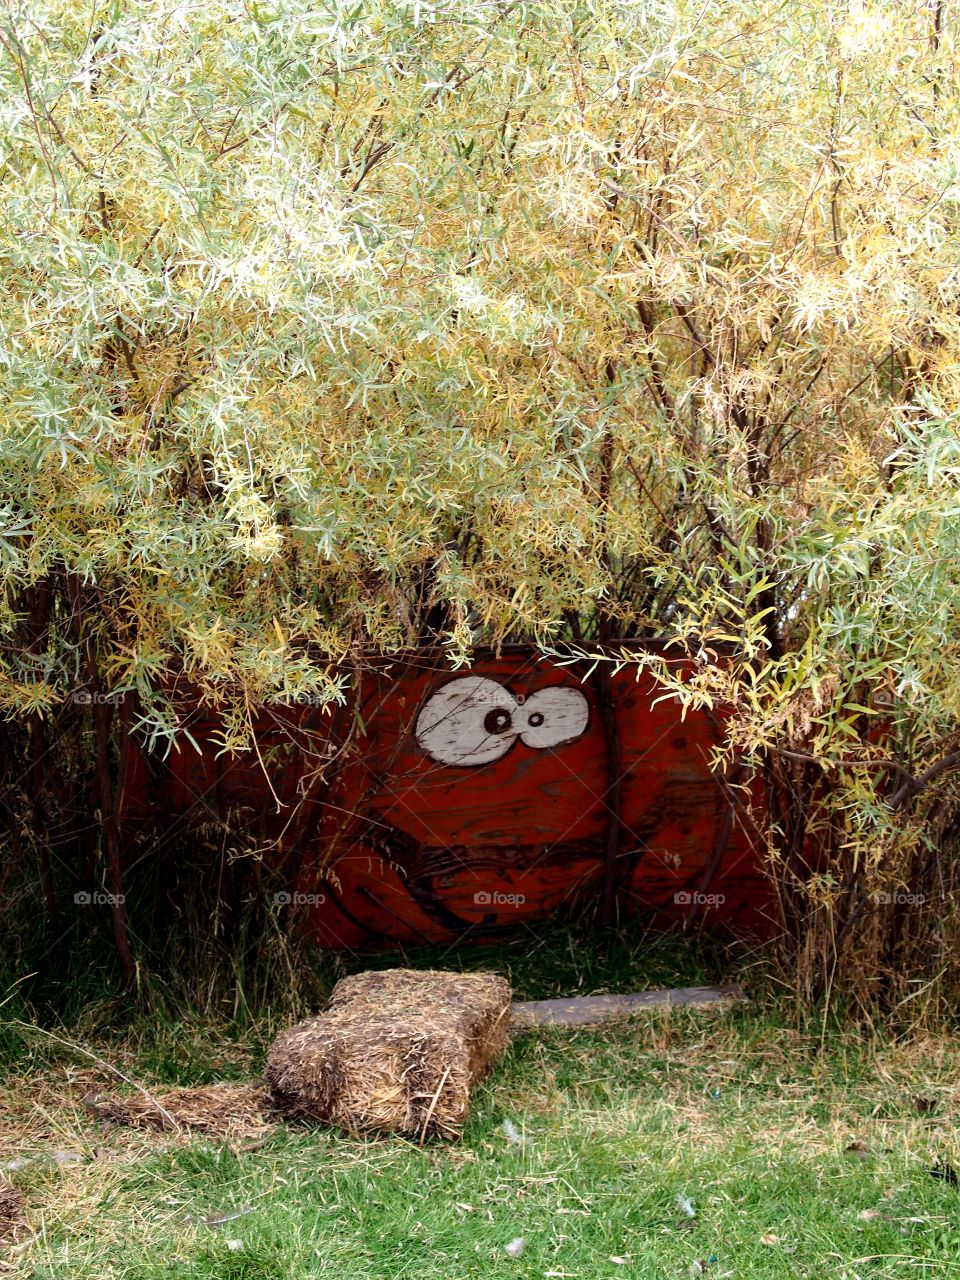 A fun decoration of a pumpkin face painted onto a piece of plywood hanging out in the bushes at a pumpkin patch on a fall day.